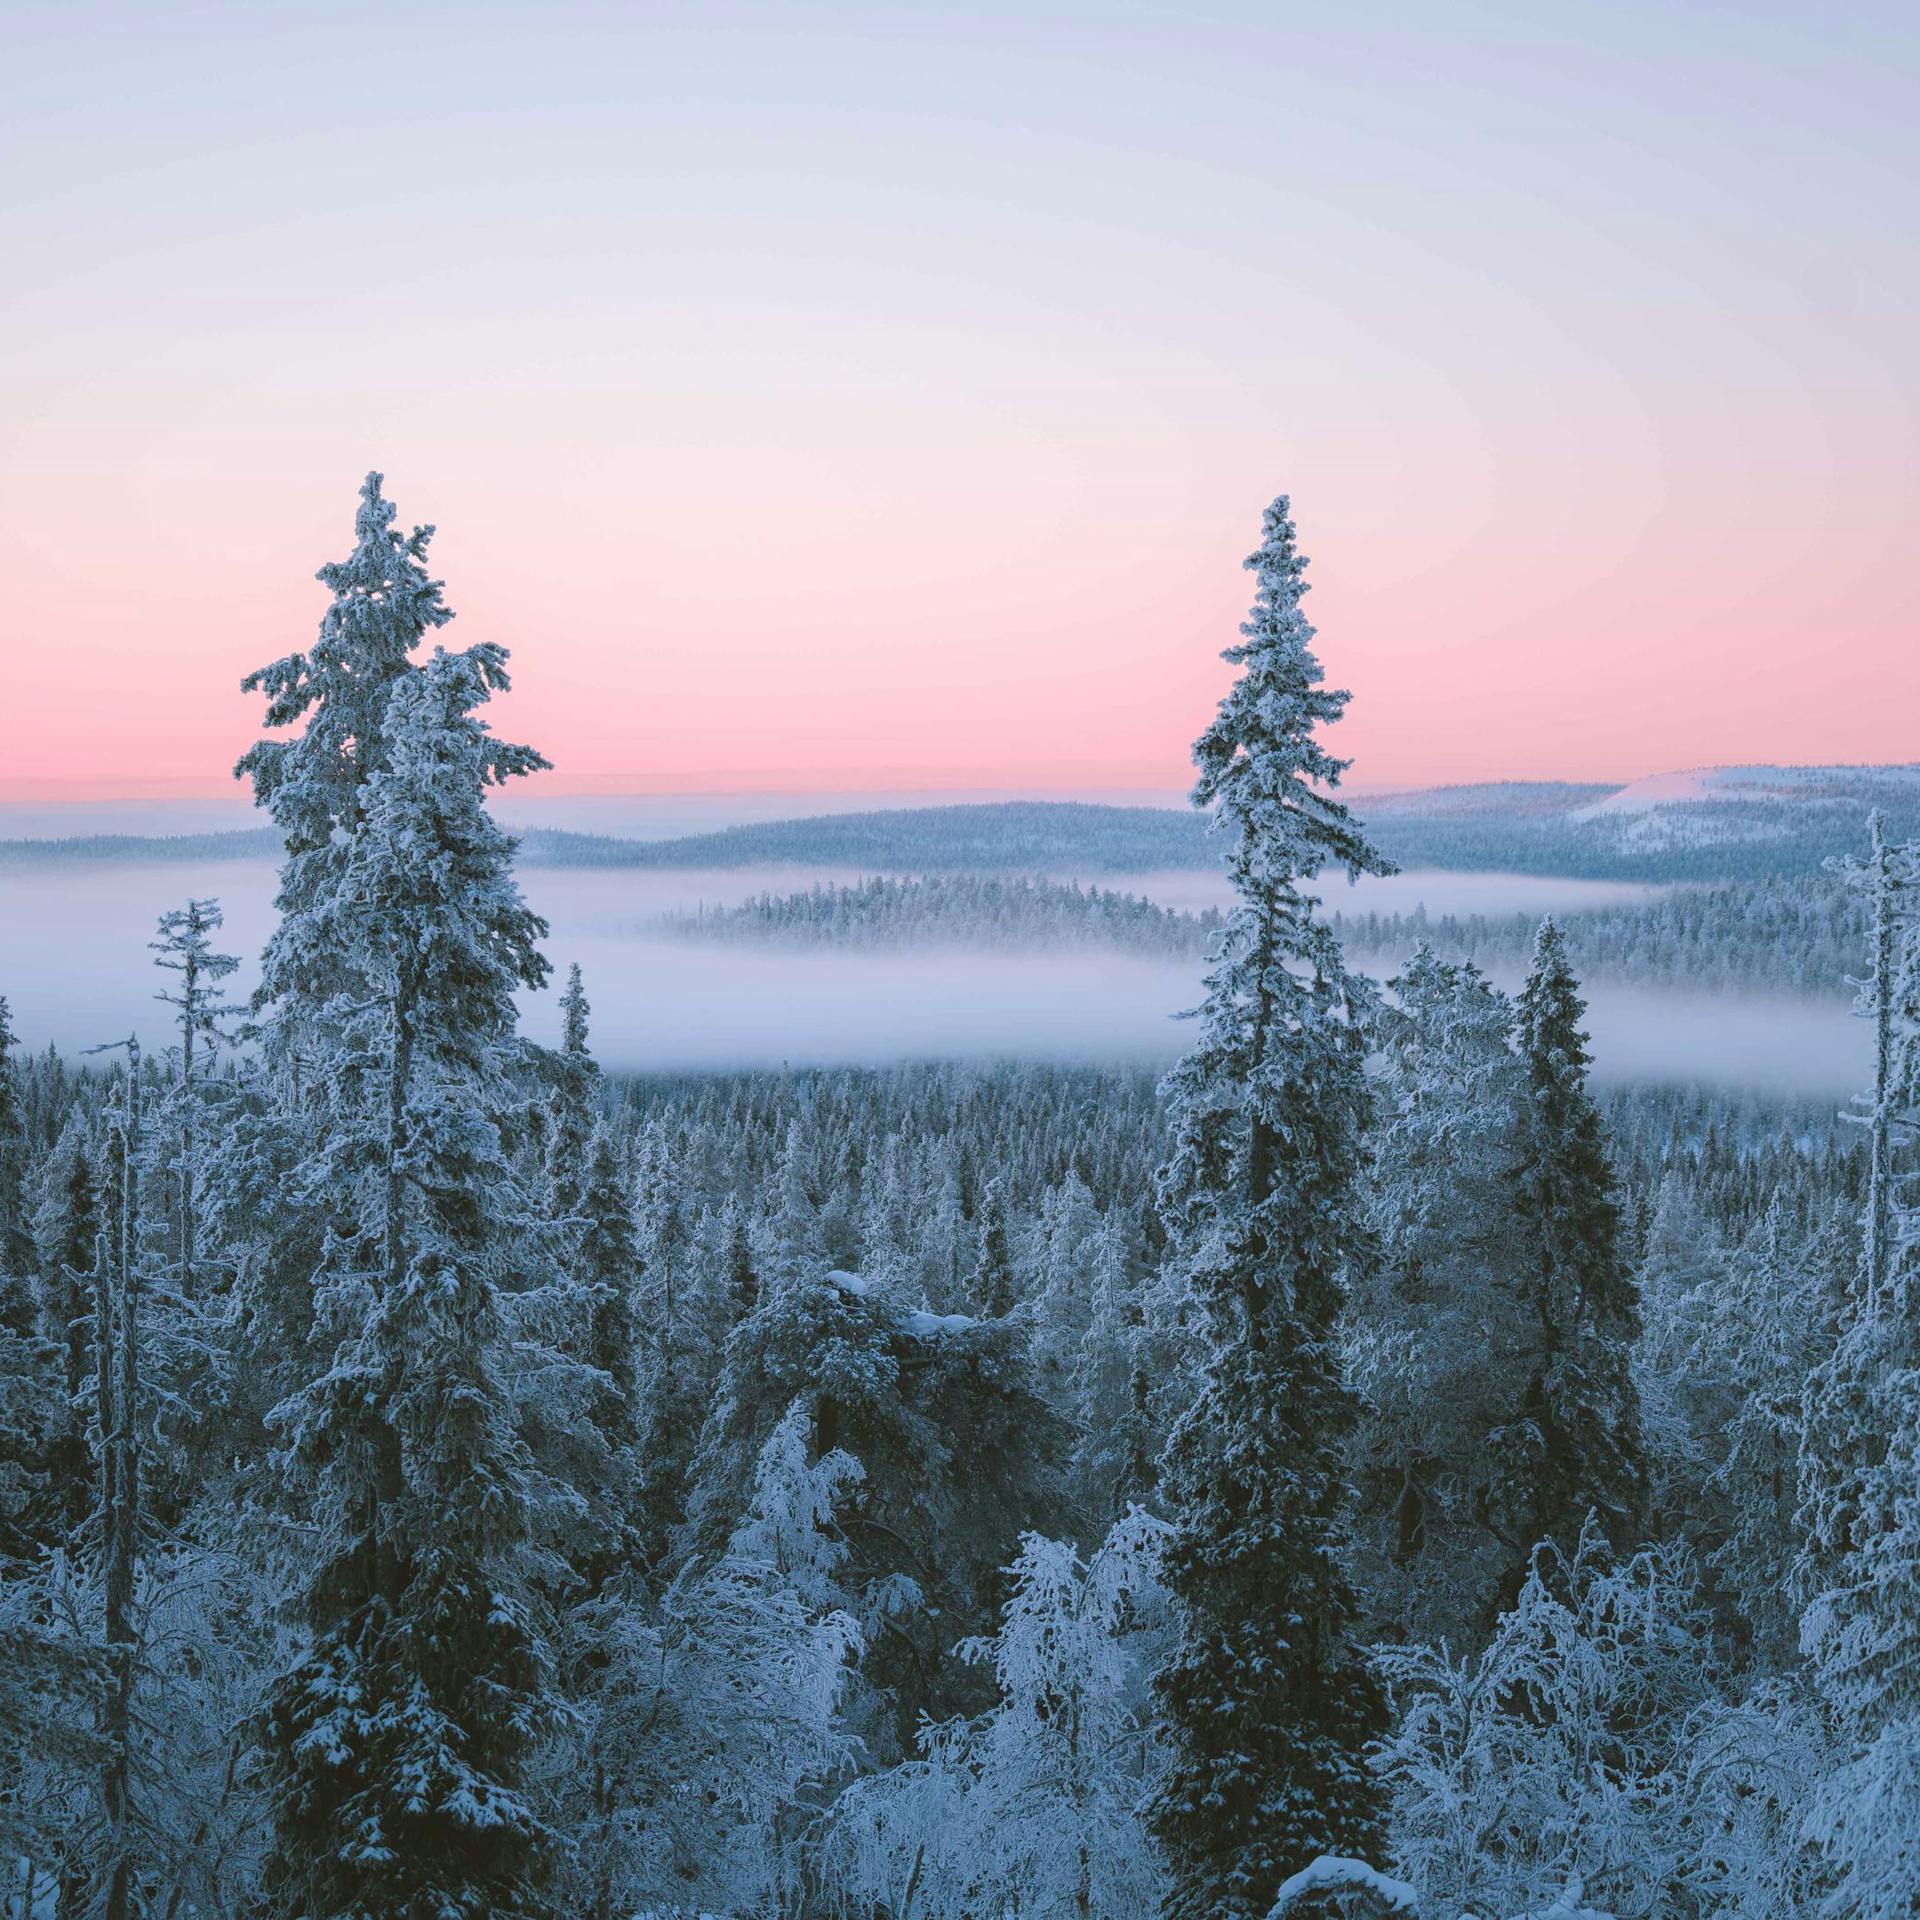 A winter landscape from the forest of Finnish Lapland